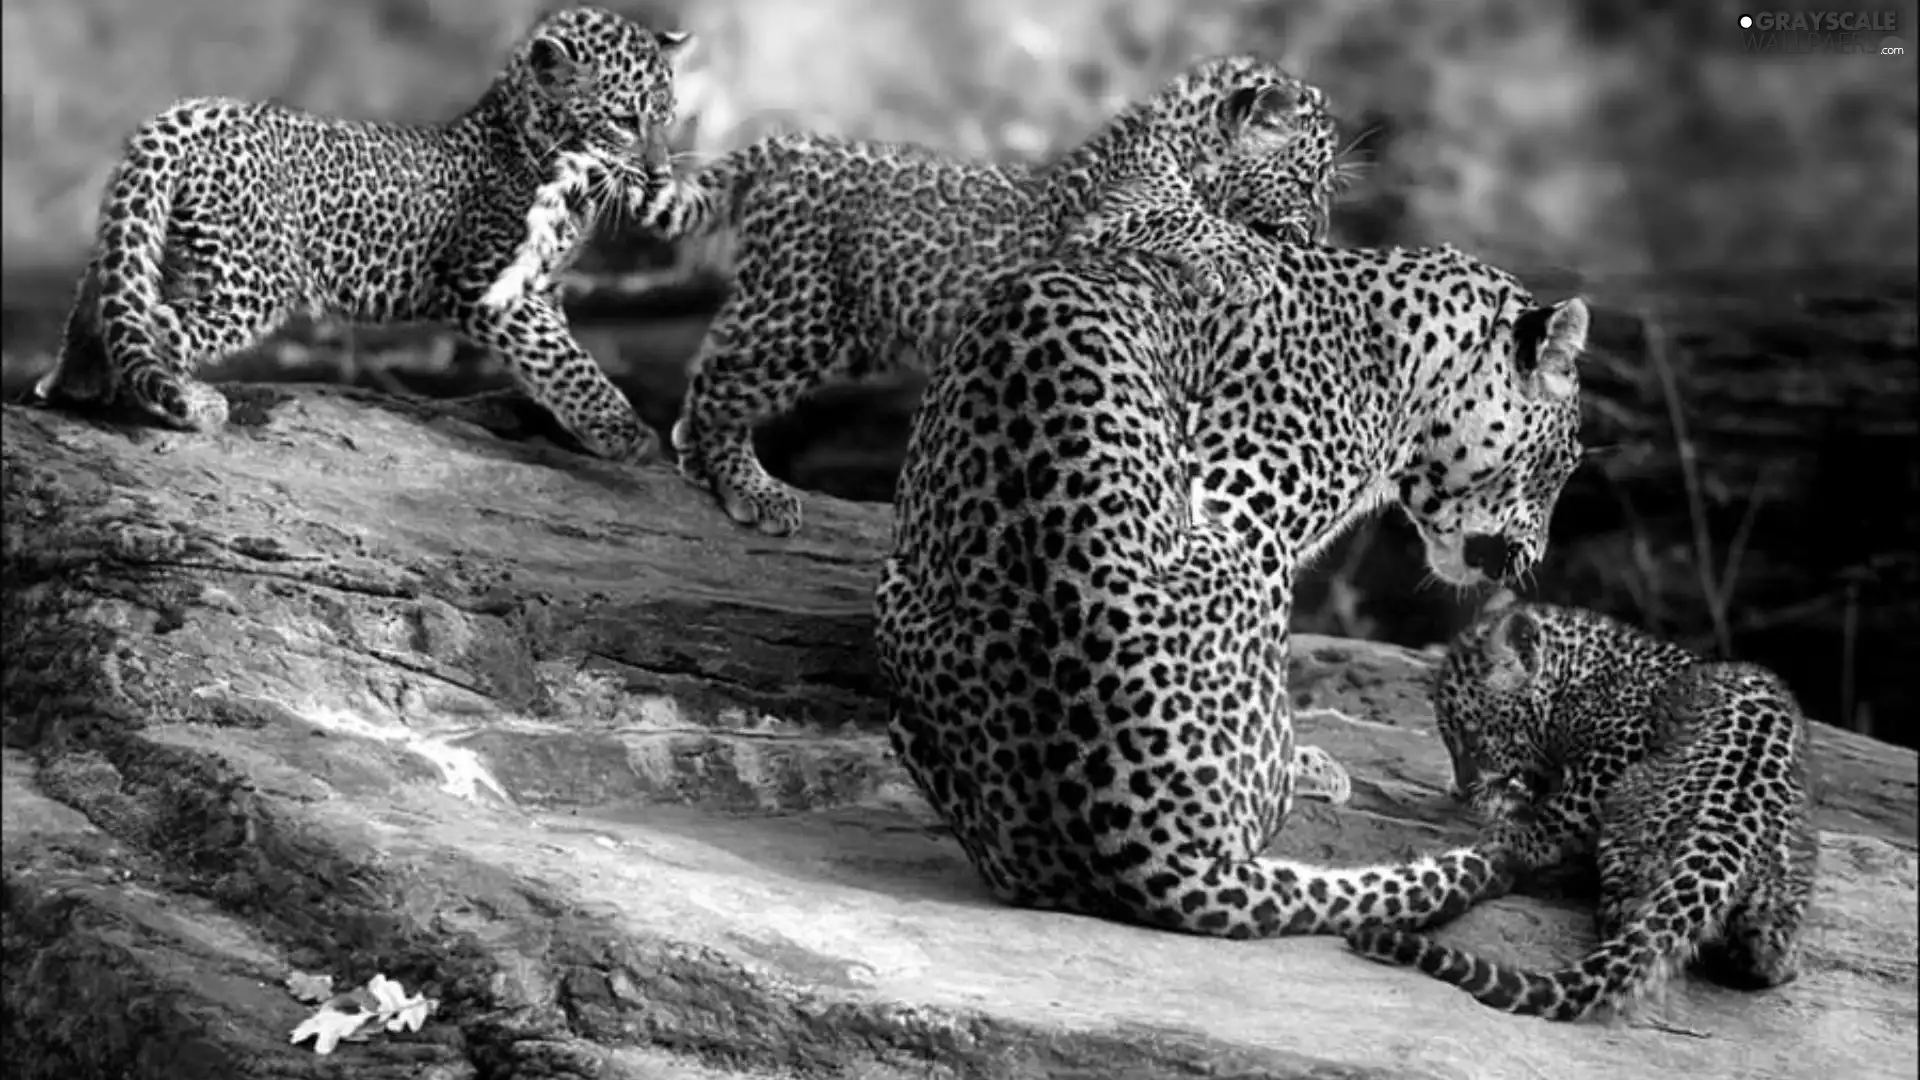 Rocks, Leopards, young